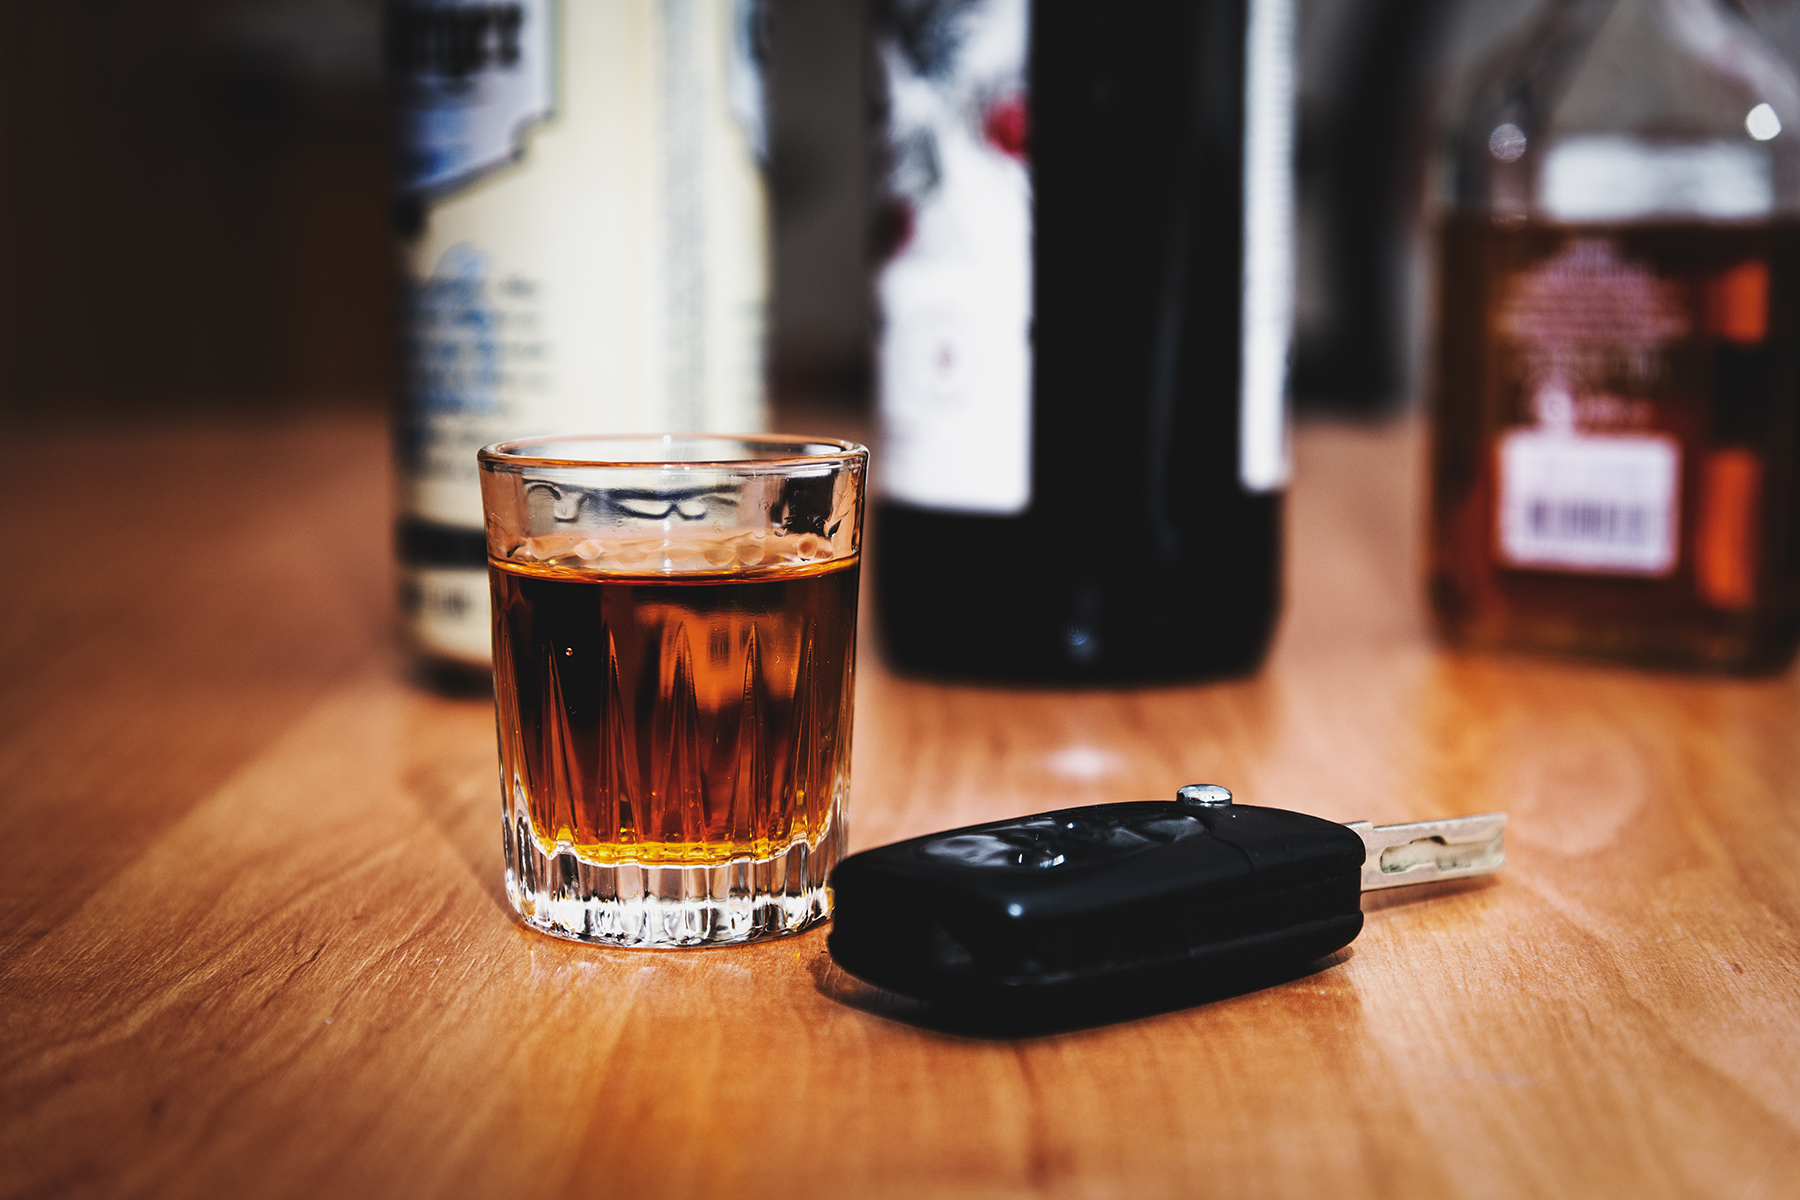 The dangers of drink-driving and drug-driving